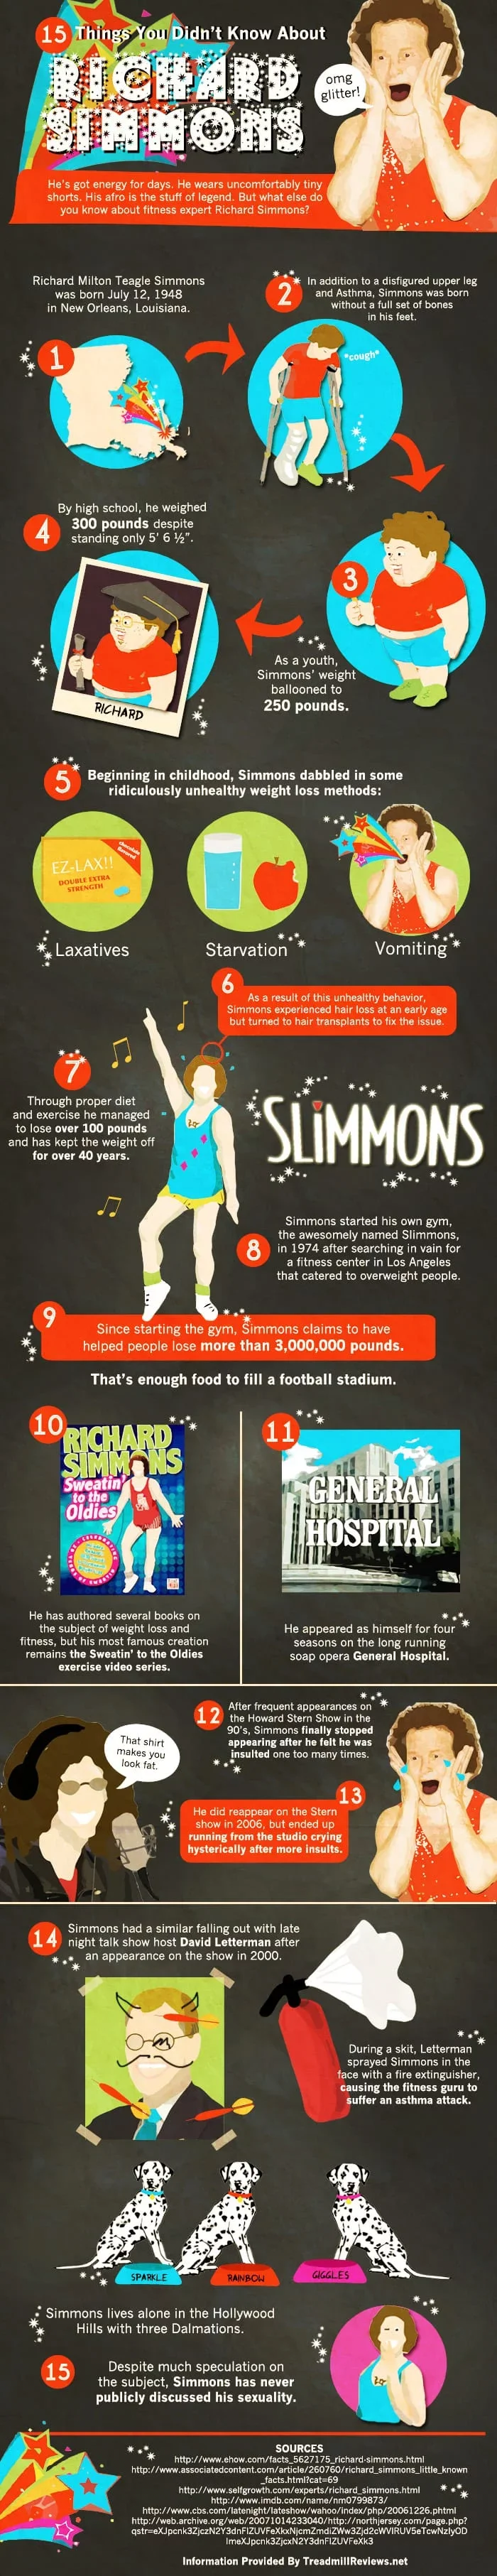 15 Facts About Richard Simmons